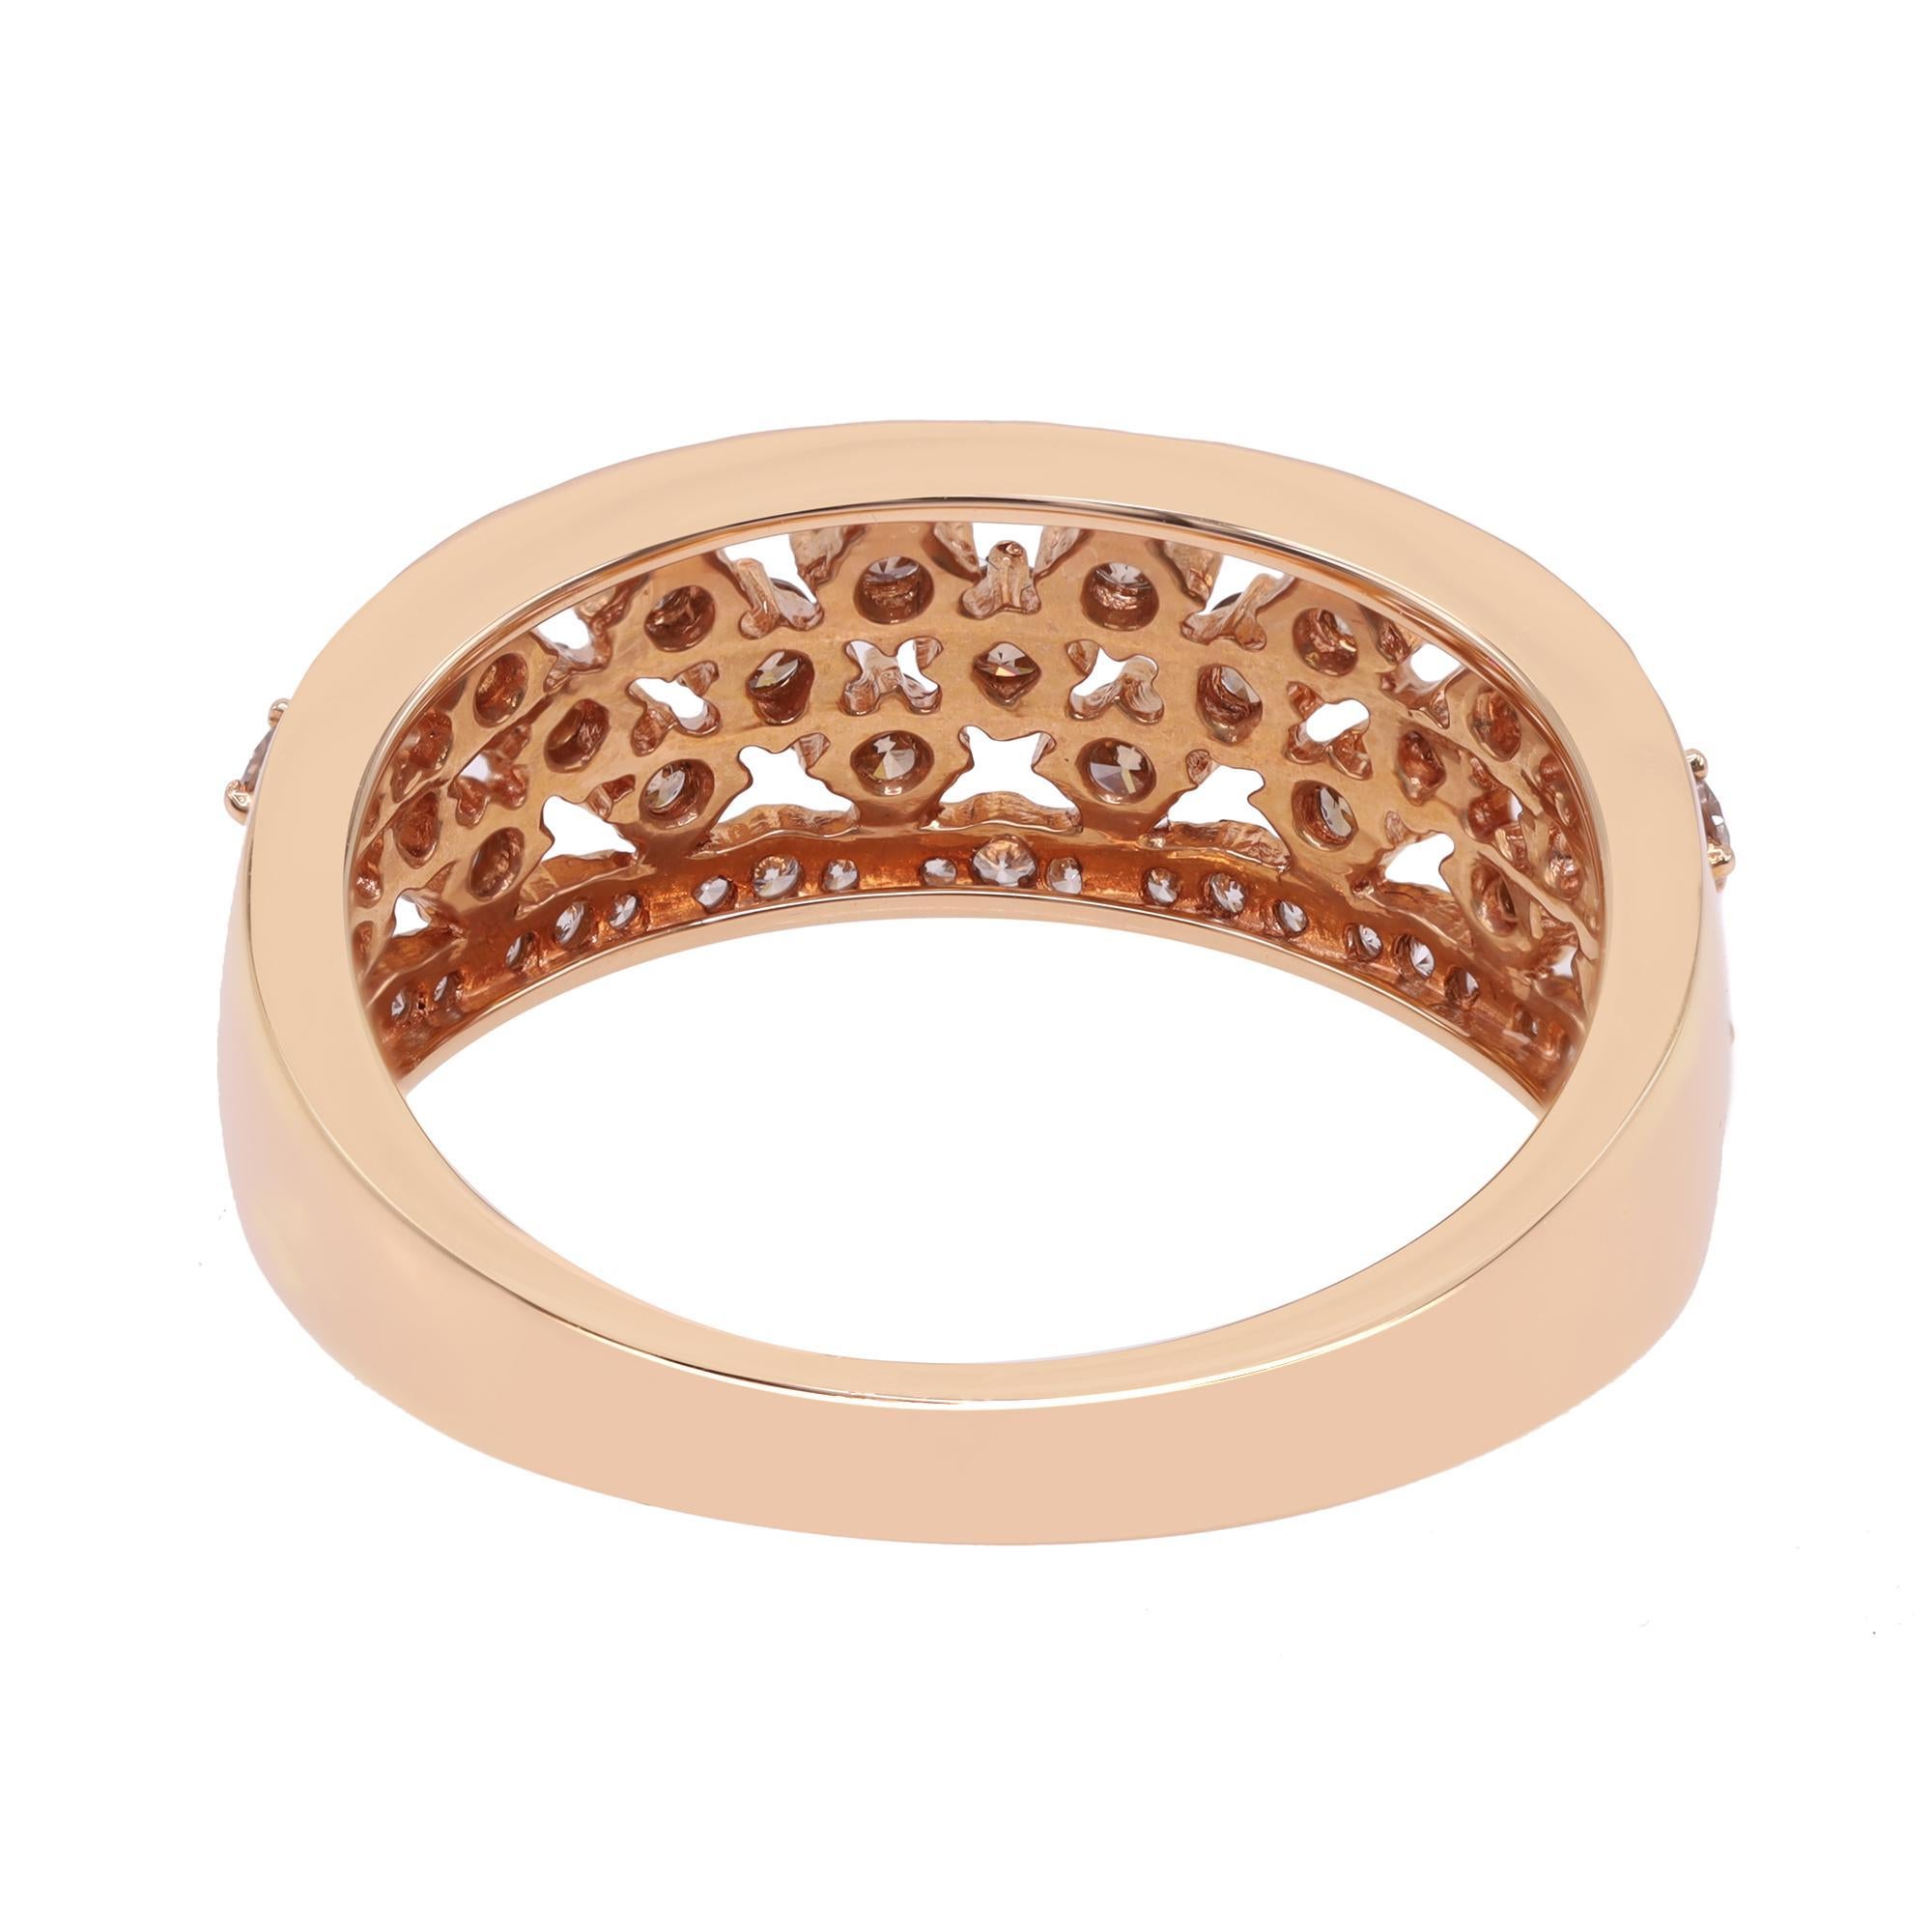 This classic diamond band ring crafted in 18k rose gold is set with round cut brown and white diamonds in half circle around the finger. The total diamond carat weight is 0.89cts. The white diamonds are in color G-H and clarity SI1-SI2. This band